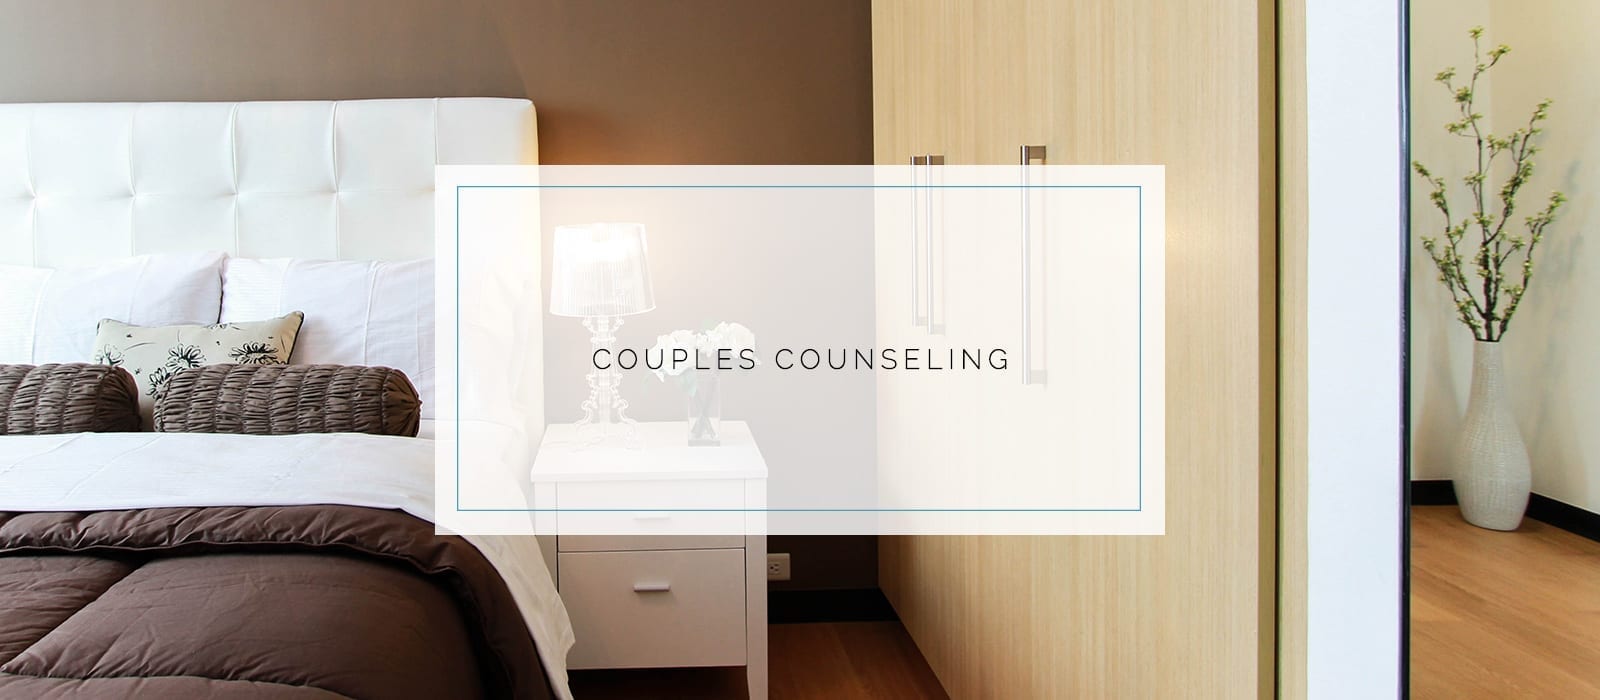 Couples Counseling with In Focus Counseling in Denver, CO